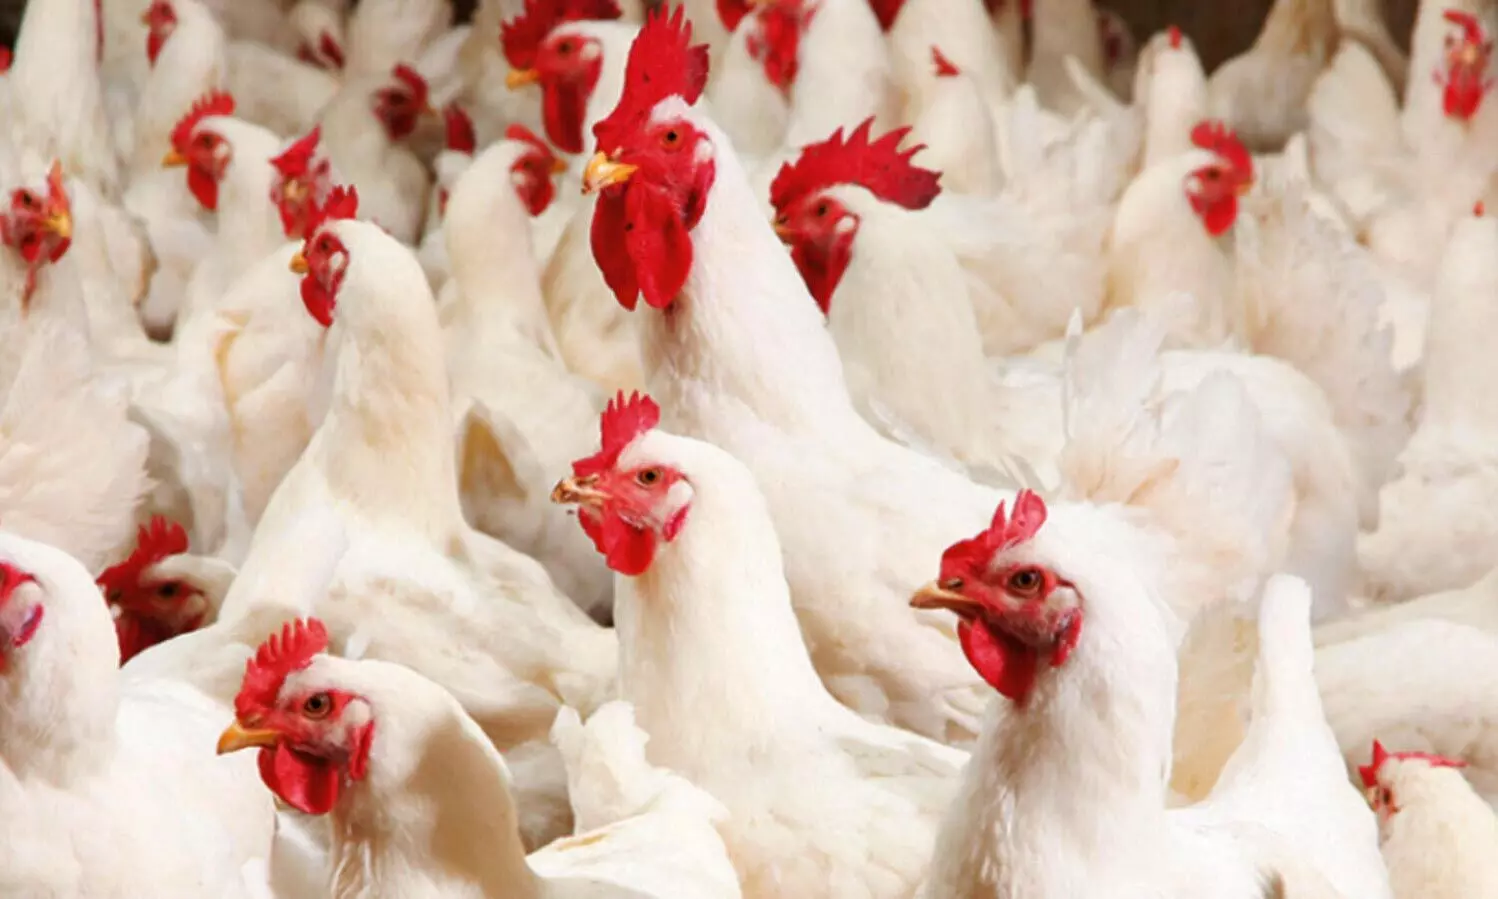 chicken prices hike